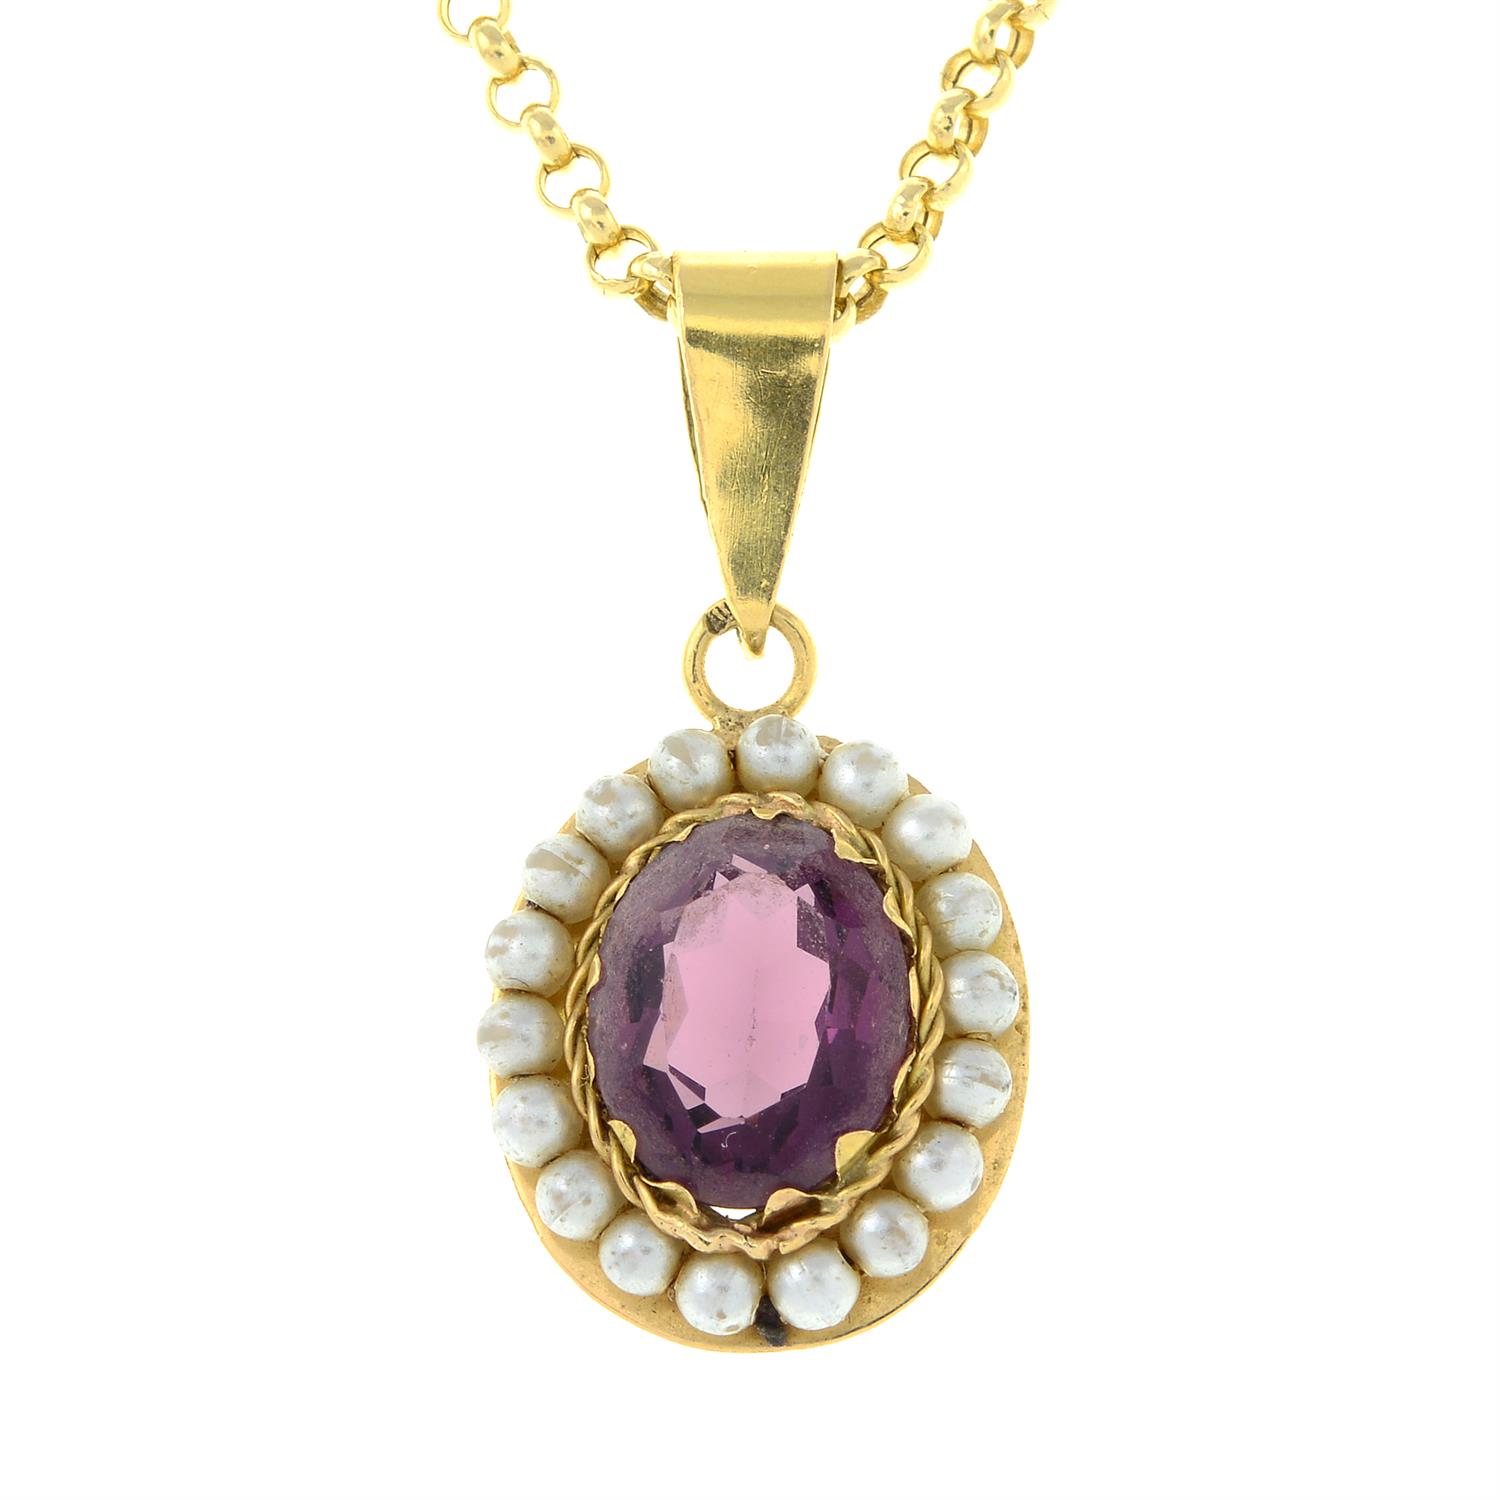 A paste and imitation pearl cluster pendant, with 18ct gold chain.